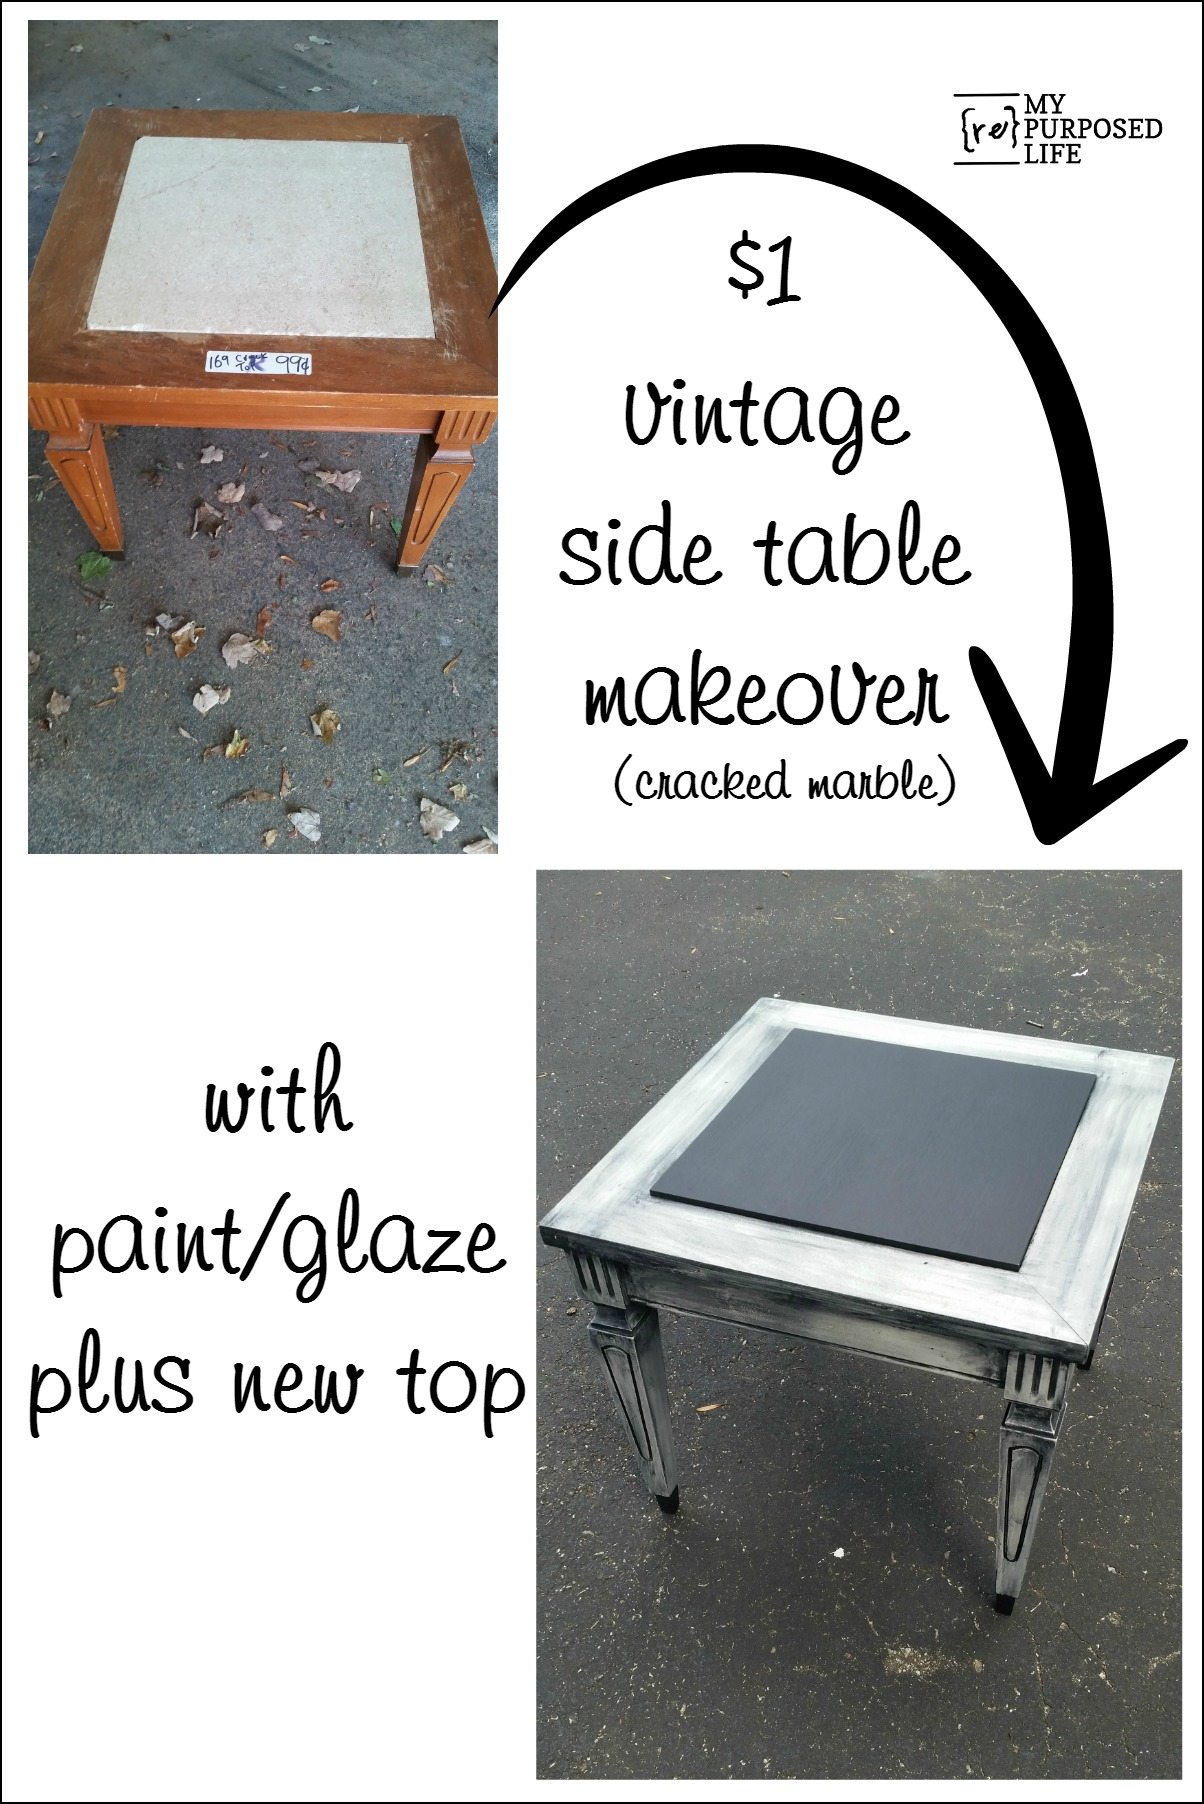 vintage side table makeover with paint and glaze MyRepurposedLife.com